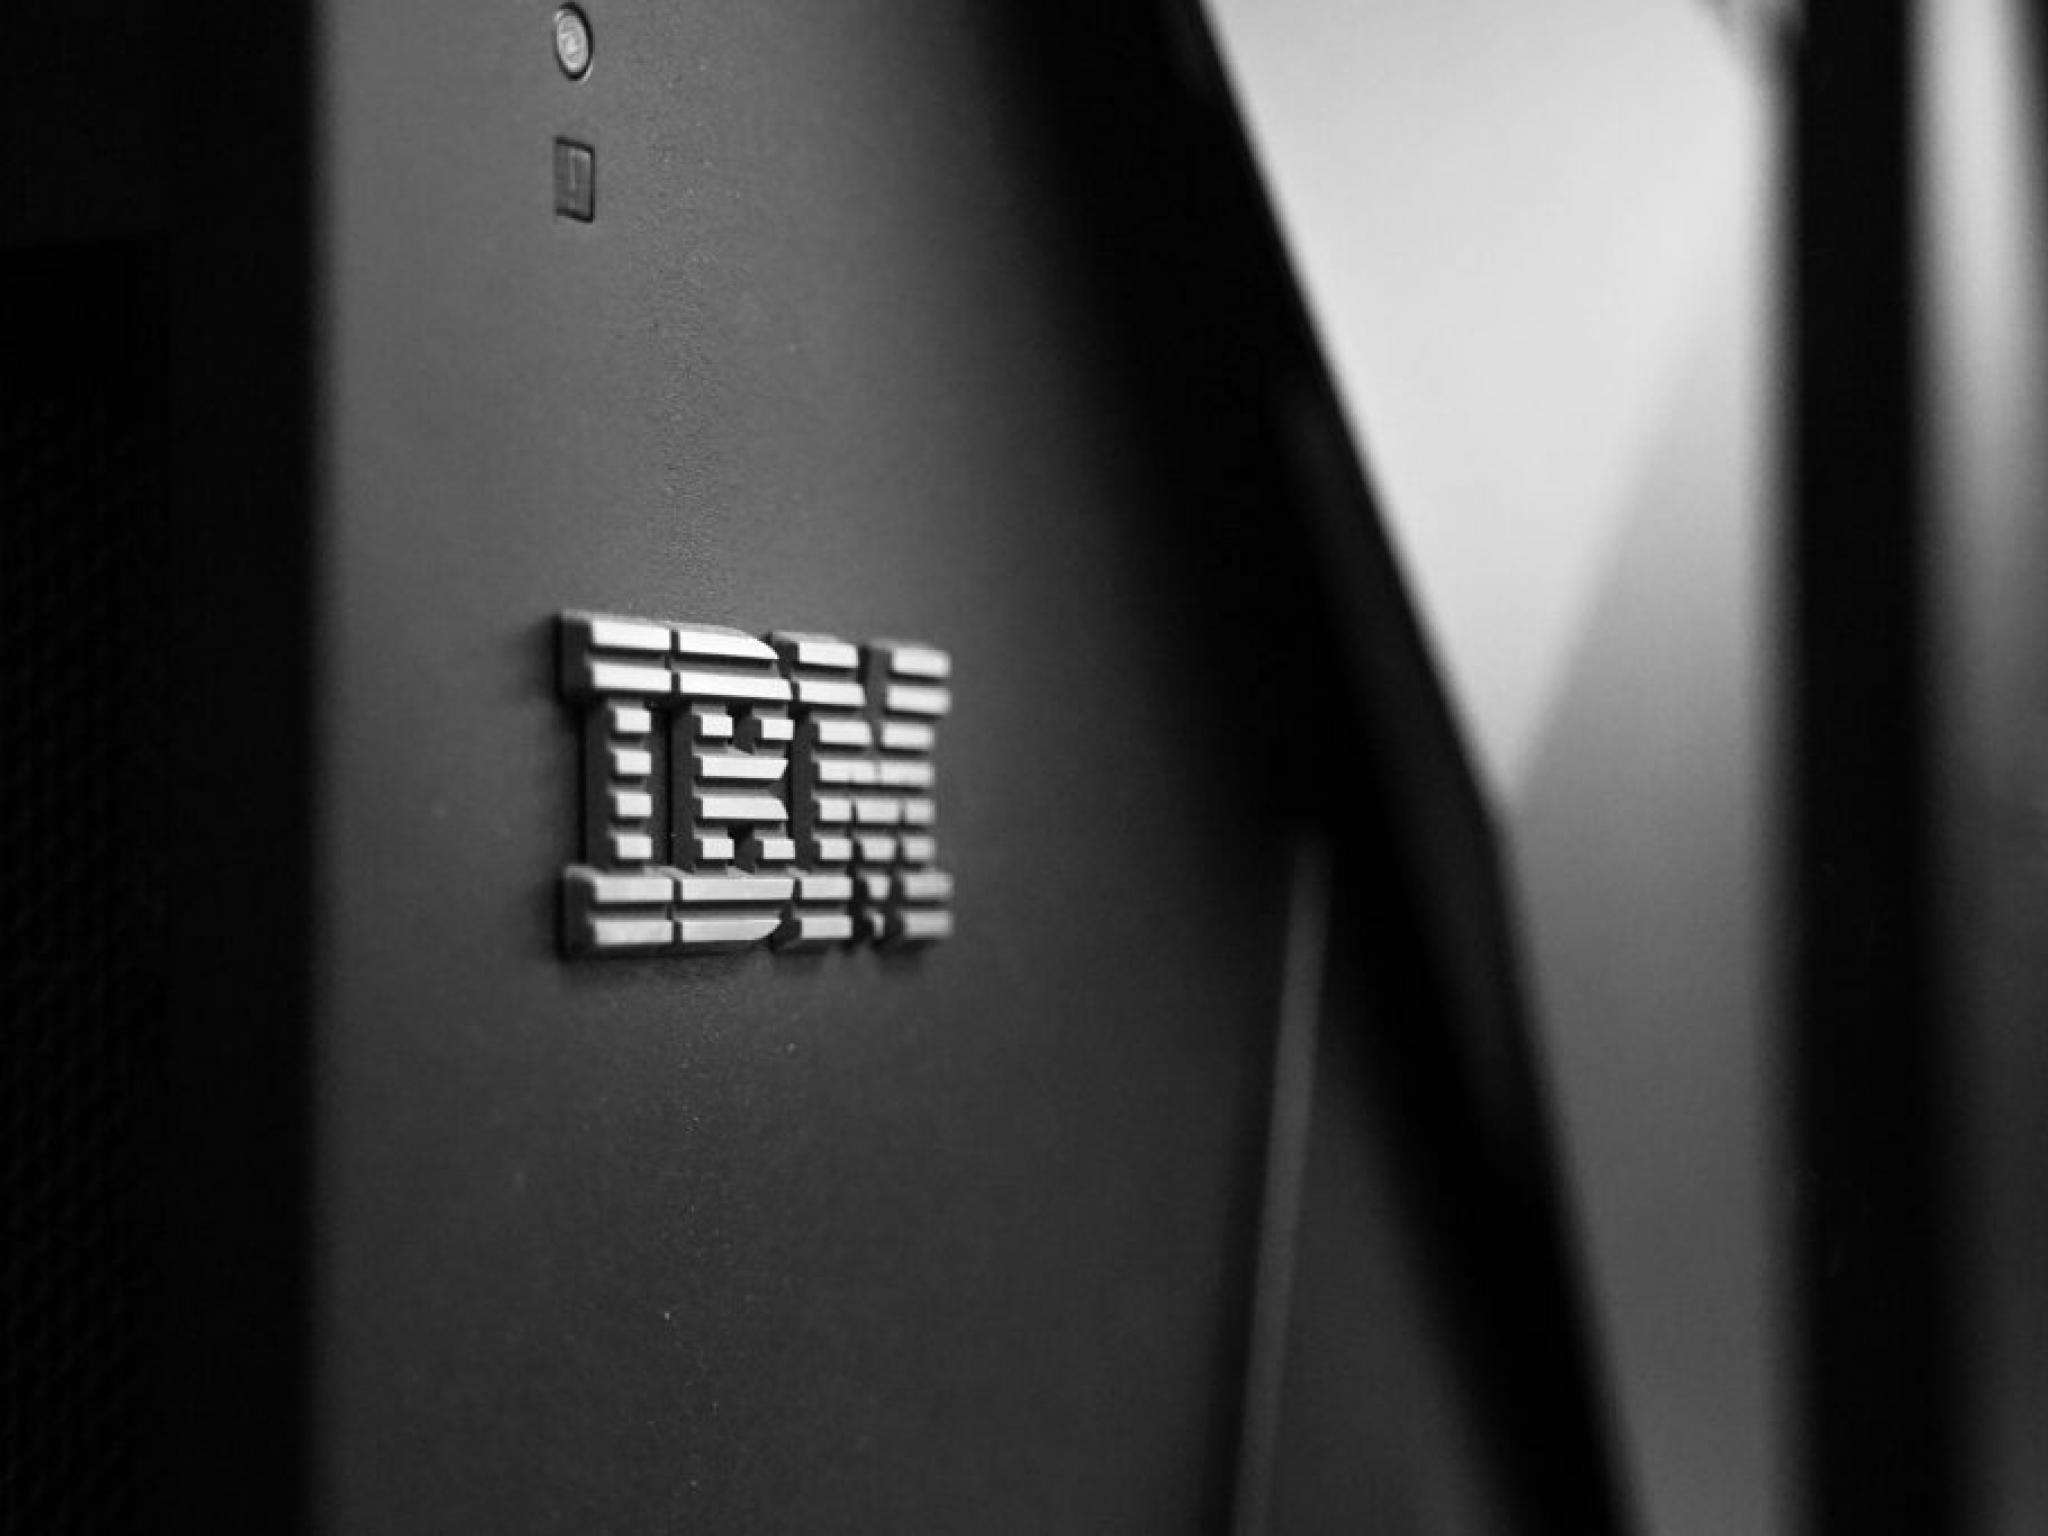  ibm-emerges-victorious-in-16b-legal-battle-report 